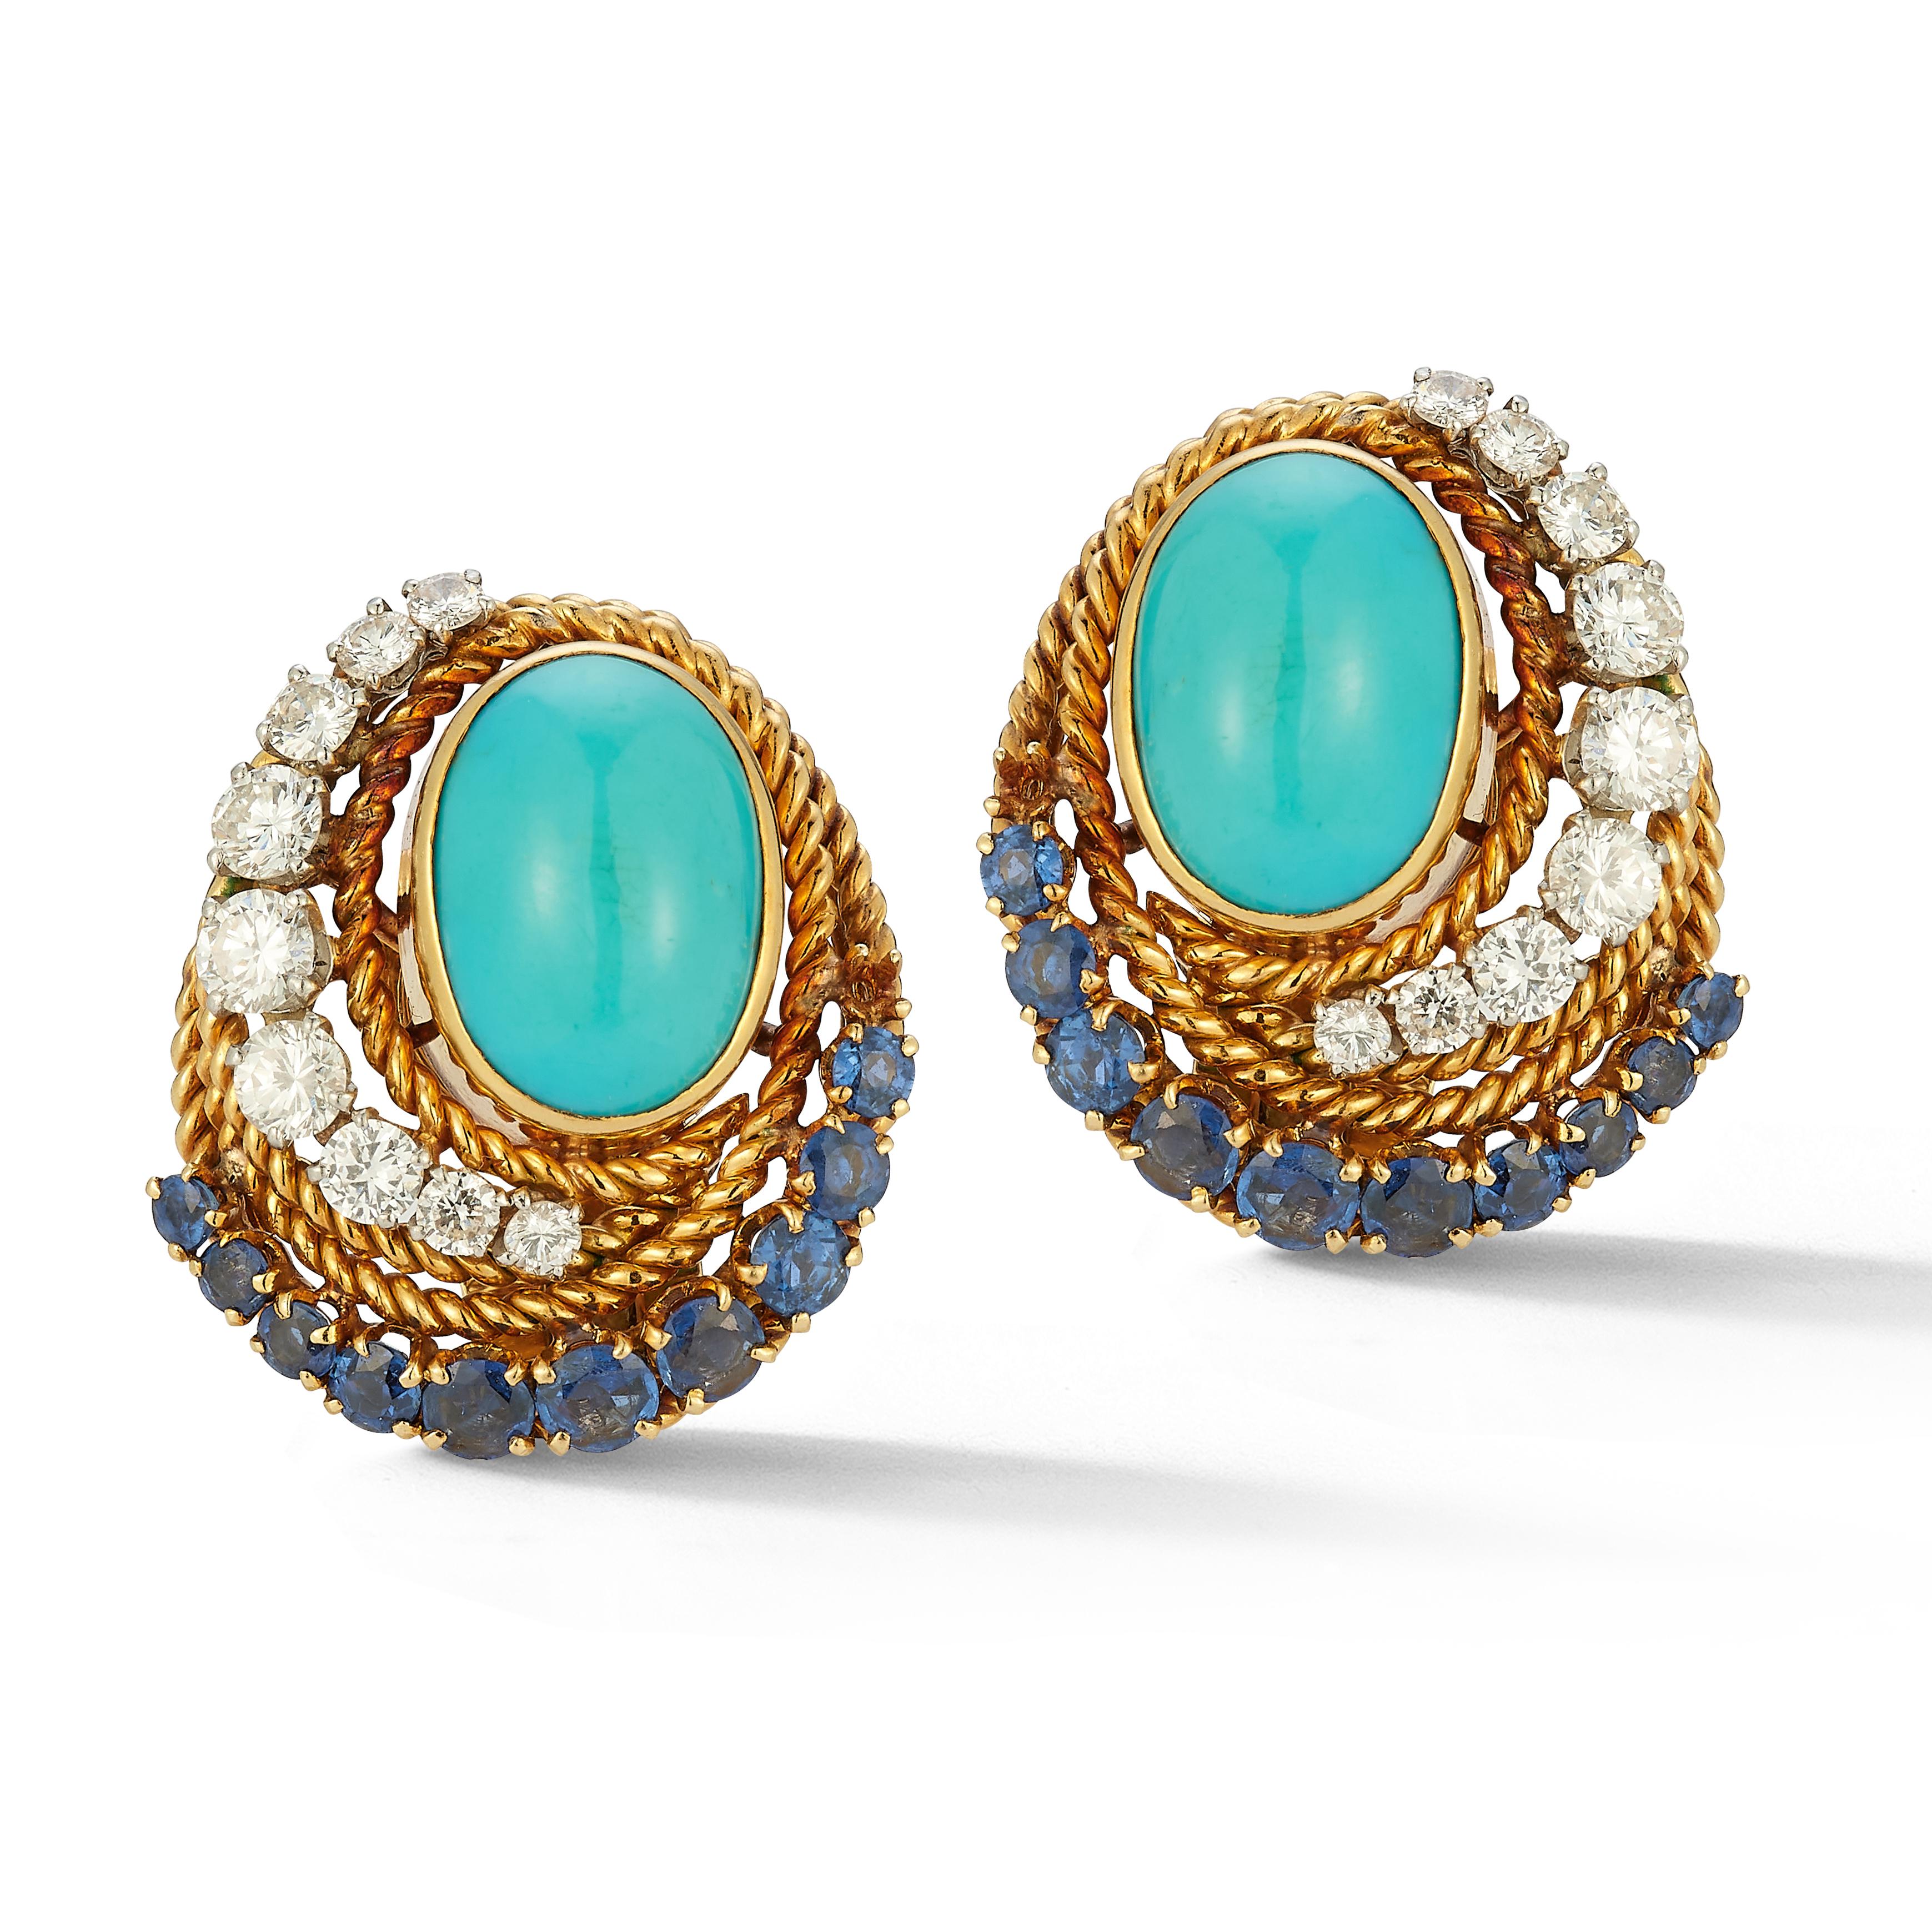 Van Cleef & Arpels Turquoise Sapphire & Diamond Earrings

A pair of 18 karat gold and platinum earrings set with cabochon turquoises, round cut sapphires, and round cut diamonds

Signed Van Cleef & Arpels and numbered

Makers mark for Péry

Length: